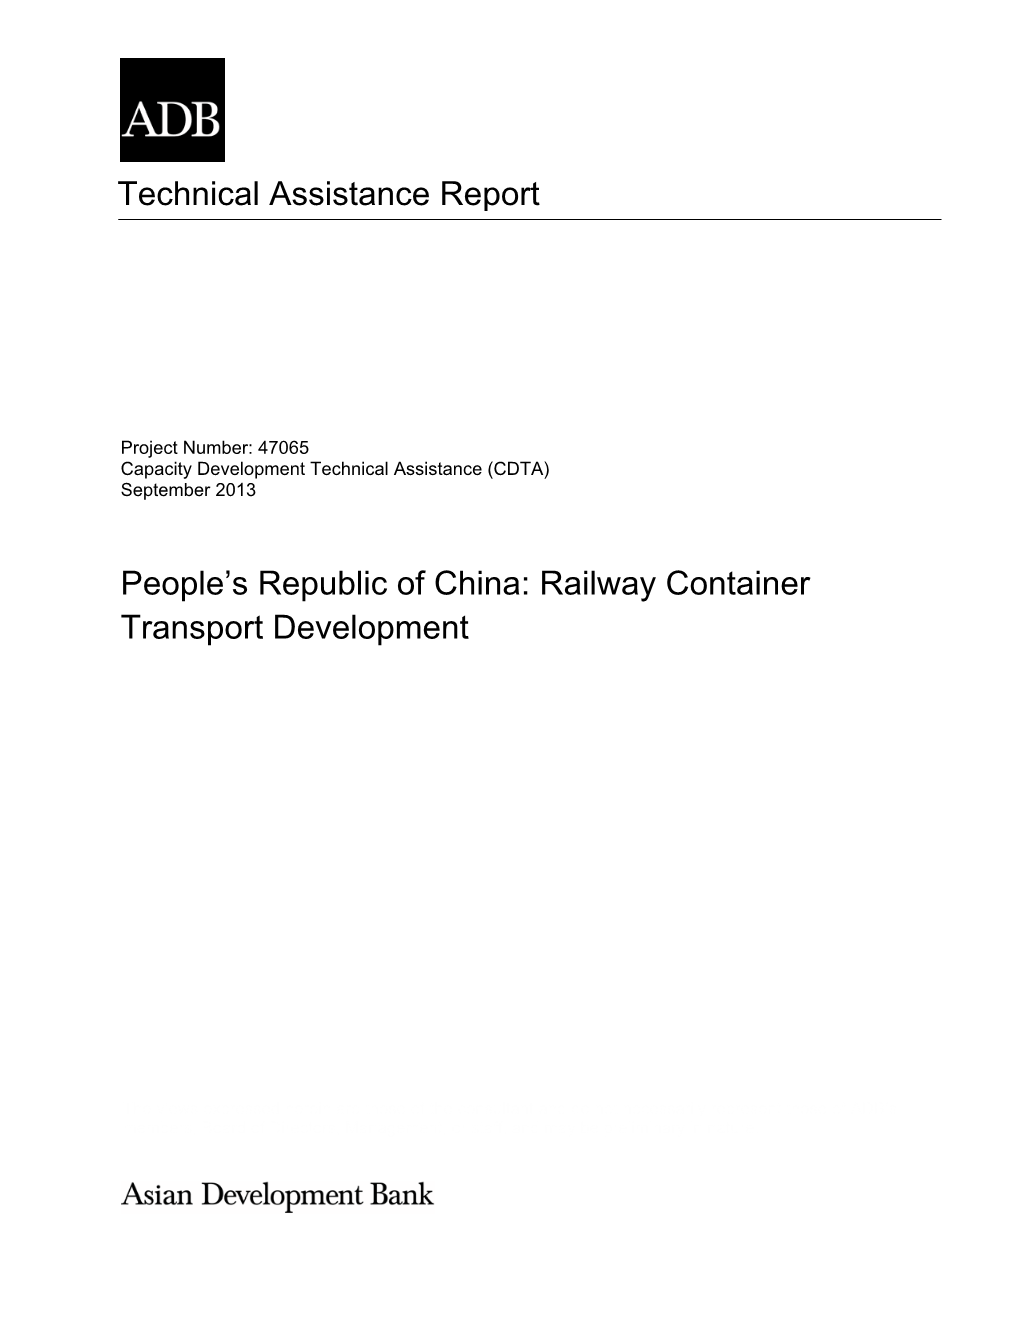 People's Republic of China: Railway Container Transport Development